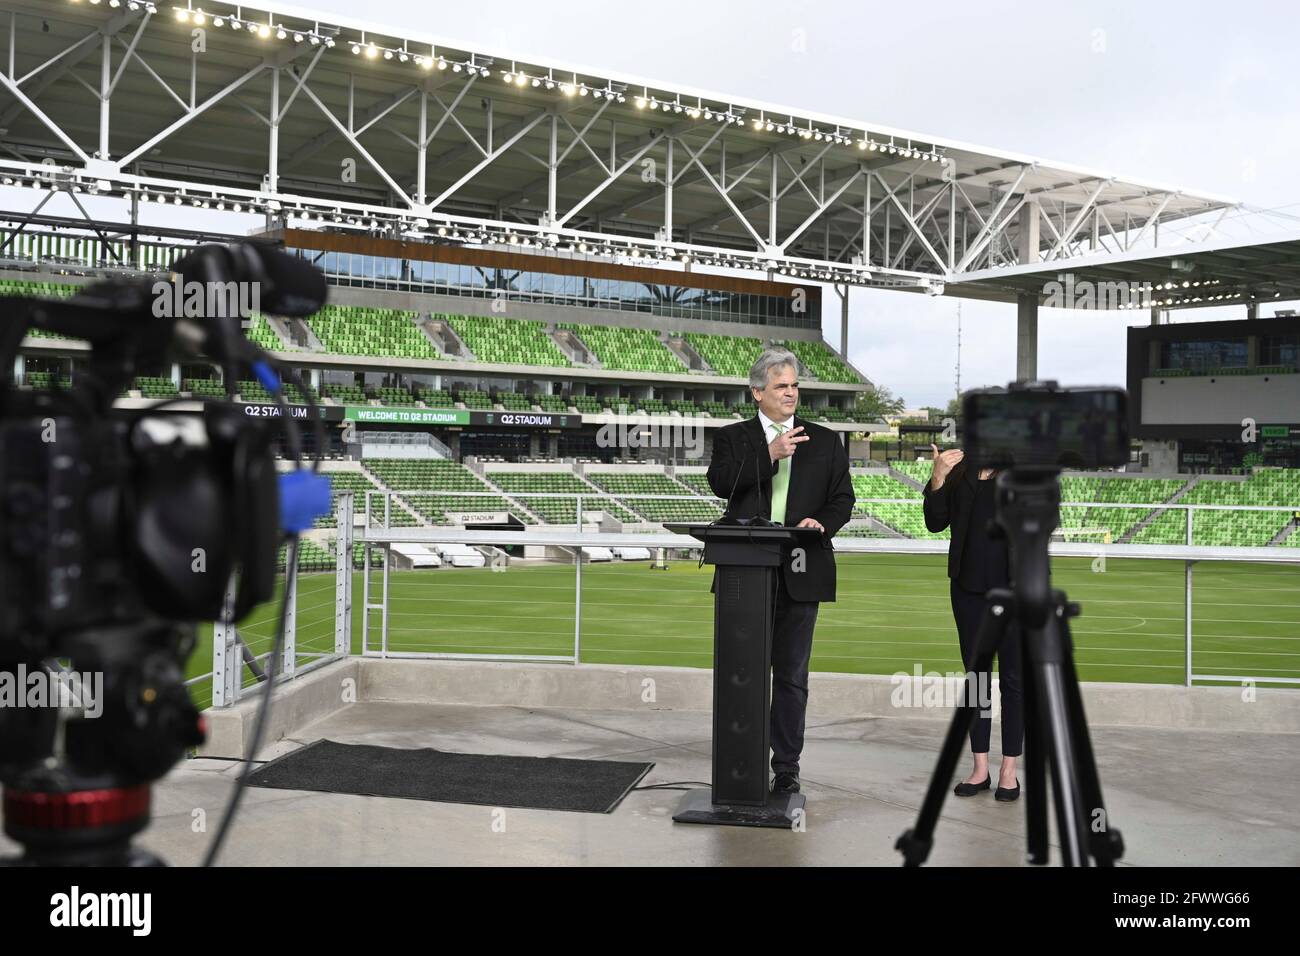 Austin Texas USA, May 24 2021: During a press conference, Austin FC officials including Mayor STEVE ADLER announce that declining pandemic numbers will allow 100% stadium capacity for Austin's Major League Soccer opening game next month. The stadium will host the U.S. Soccer Women's National Team in a friendly with Nigeria on June 16th, 2021. Credit: Bob Daemmrich/Alamy Live News Stock Photo